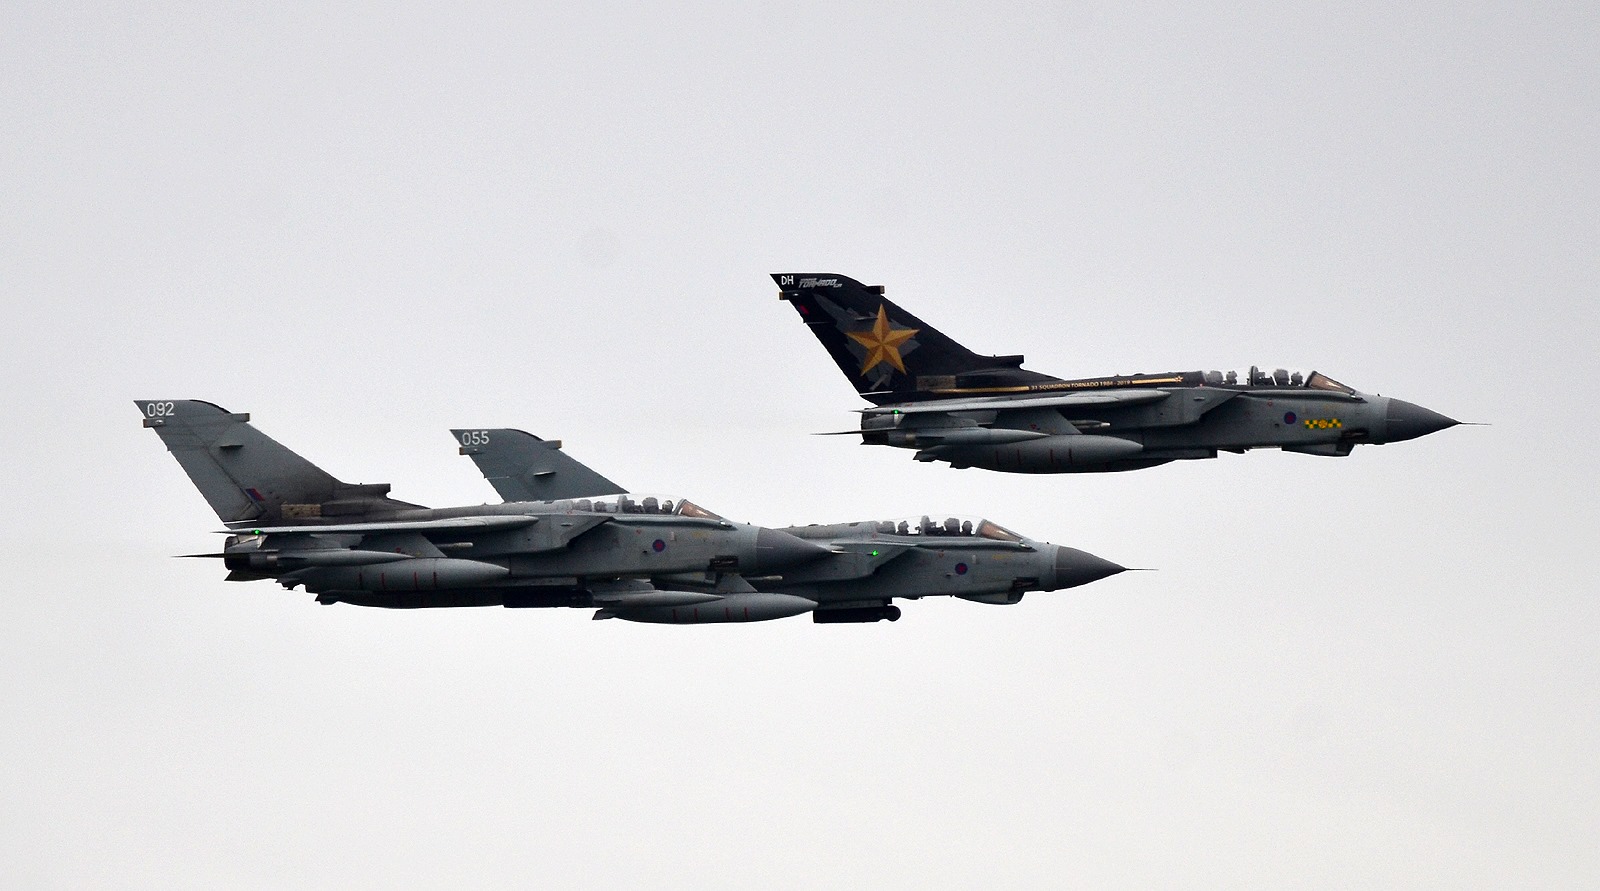 The Tornado Flypast in formation (Image: Ian Grinter)